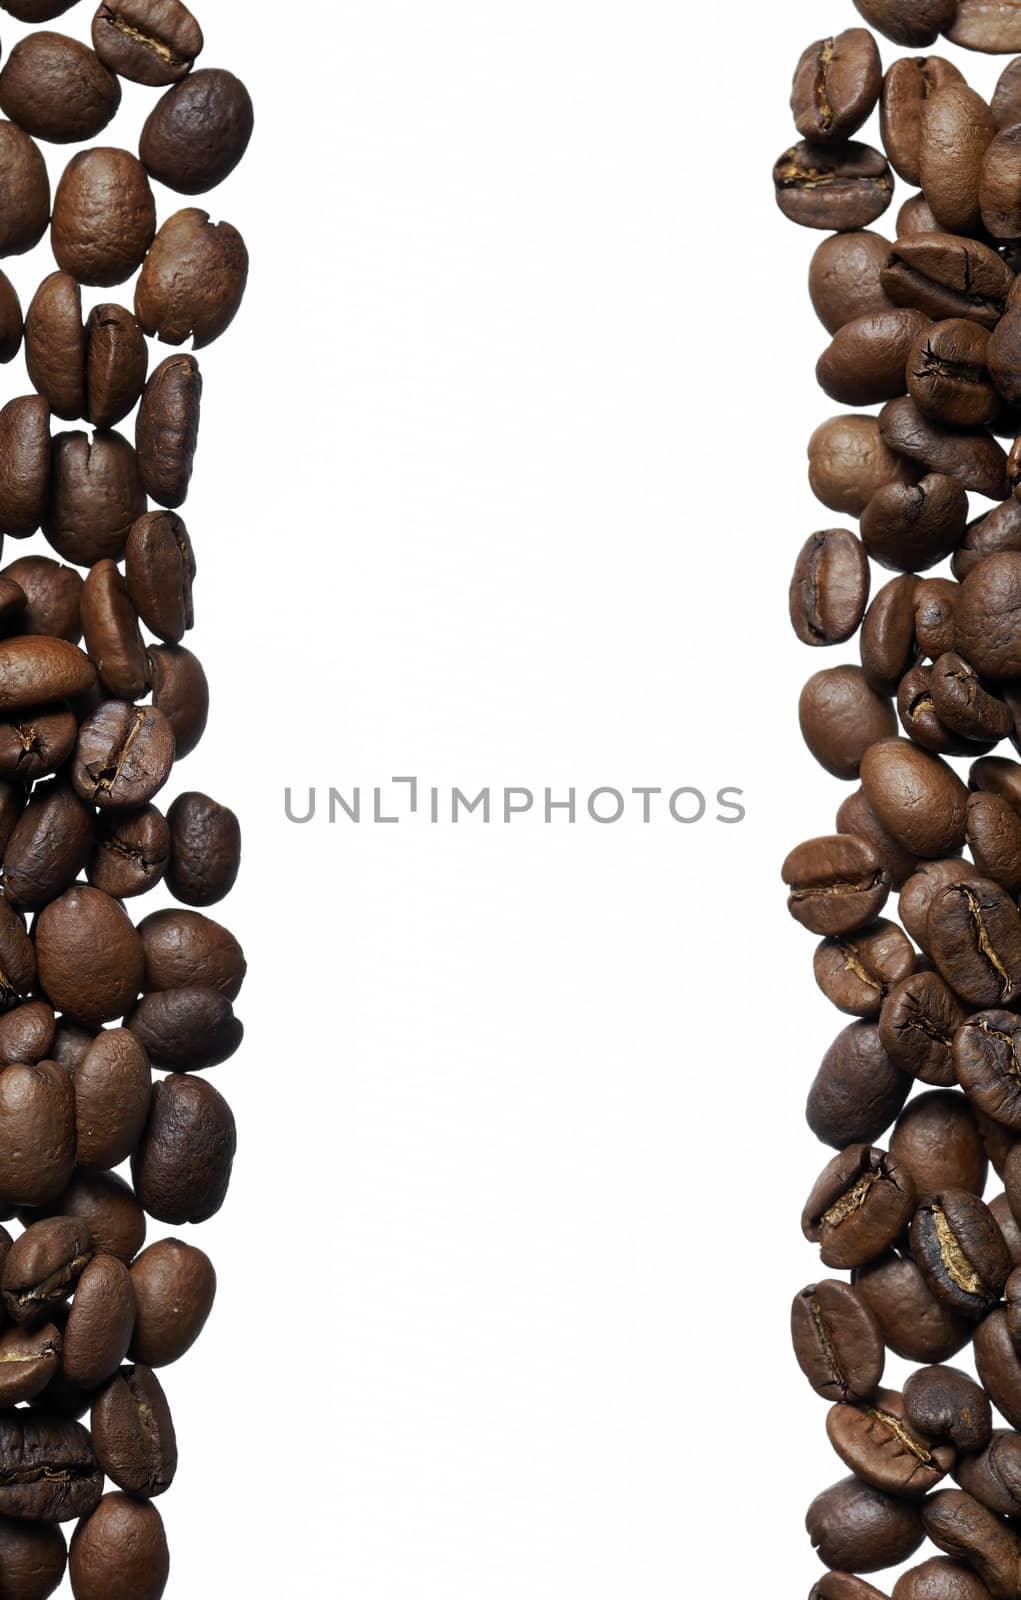 Frame on white background. Focus on coffee beans.